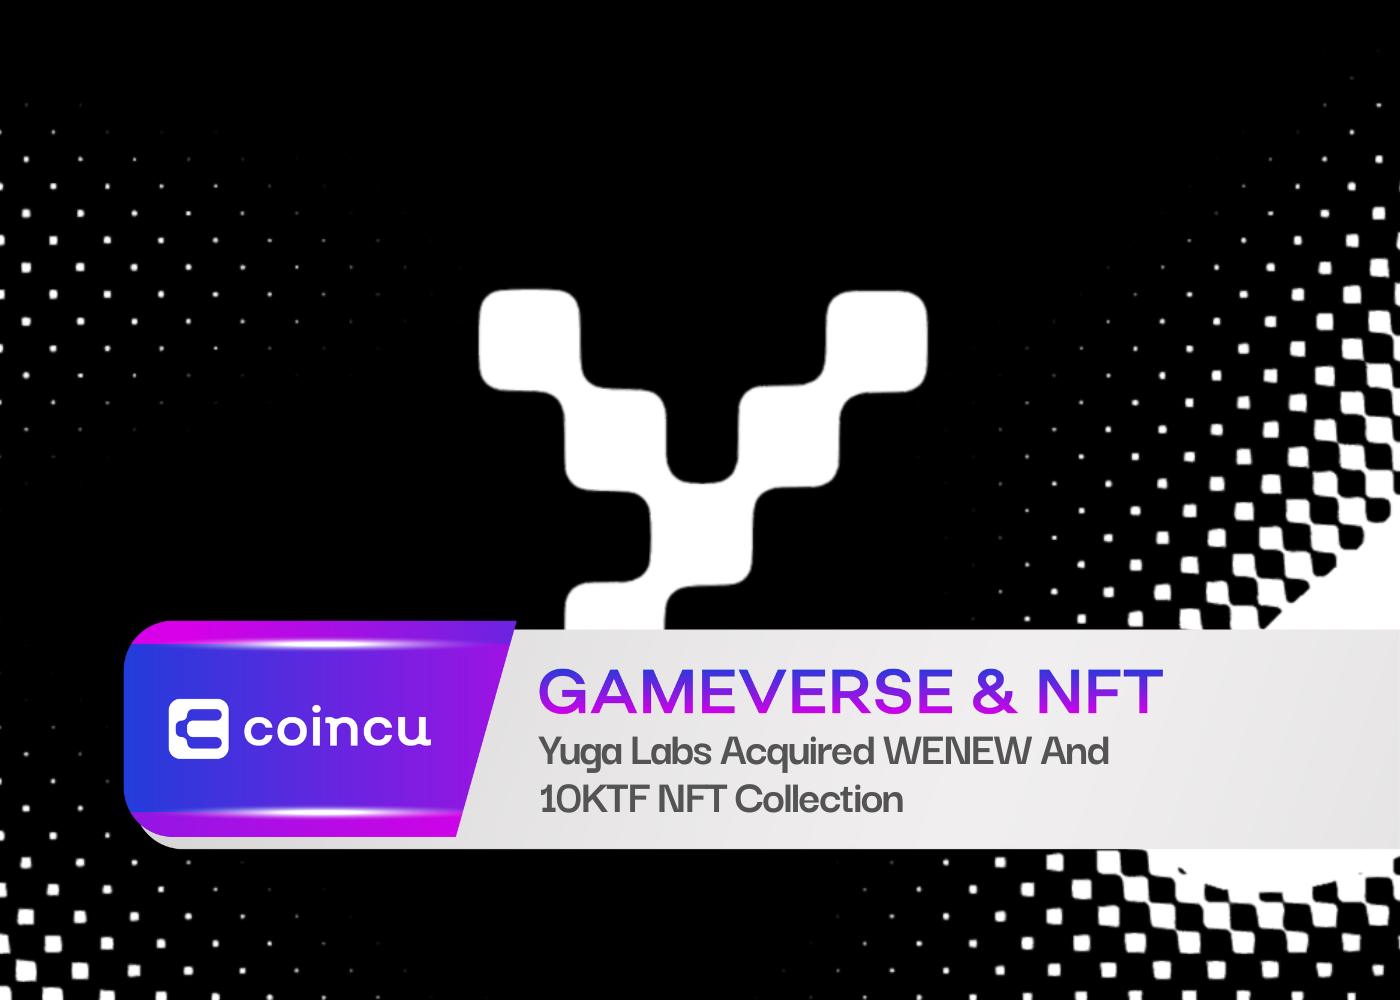 Yuga Labs Acquired WENEW And 10KTF NFT Collection